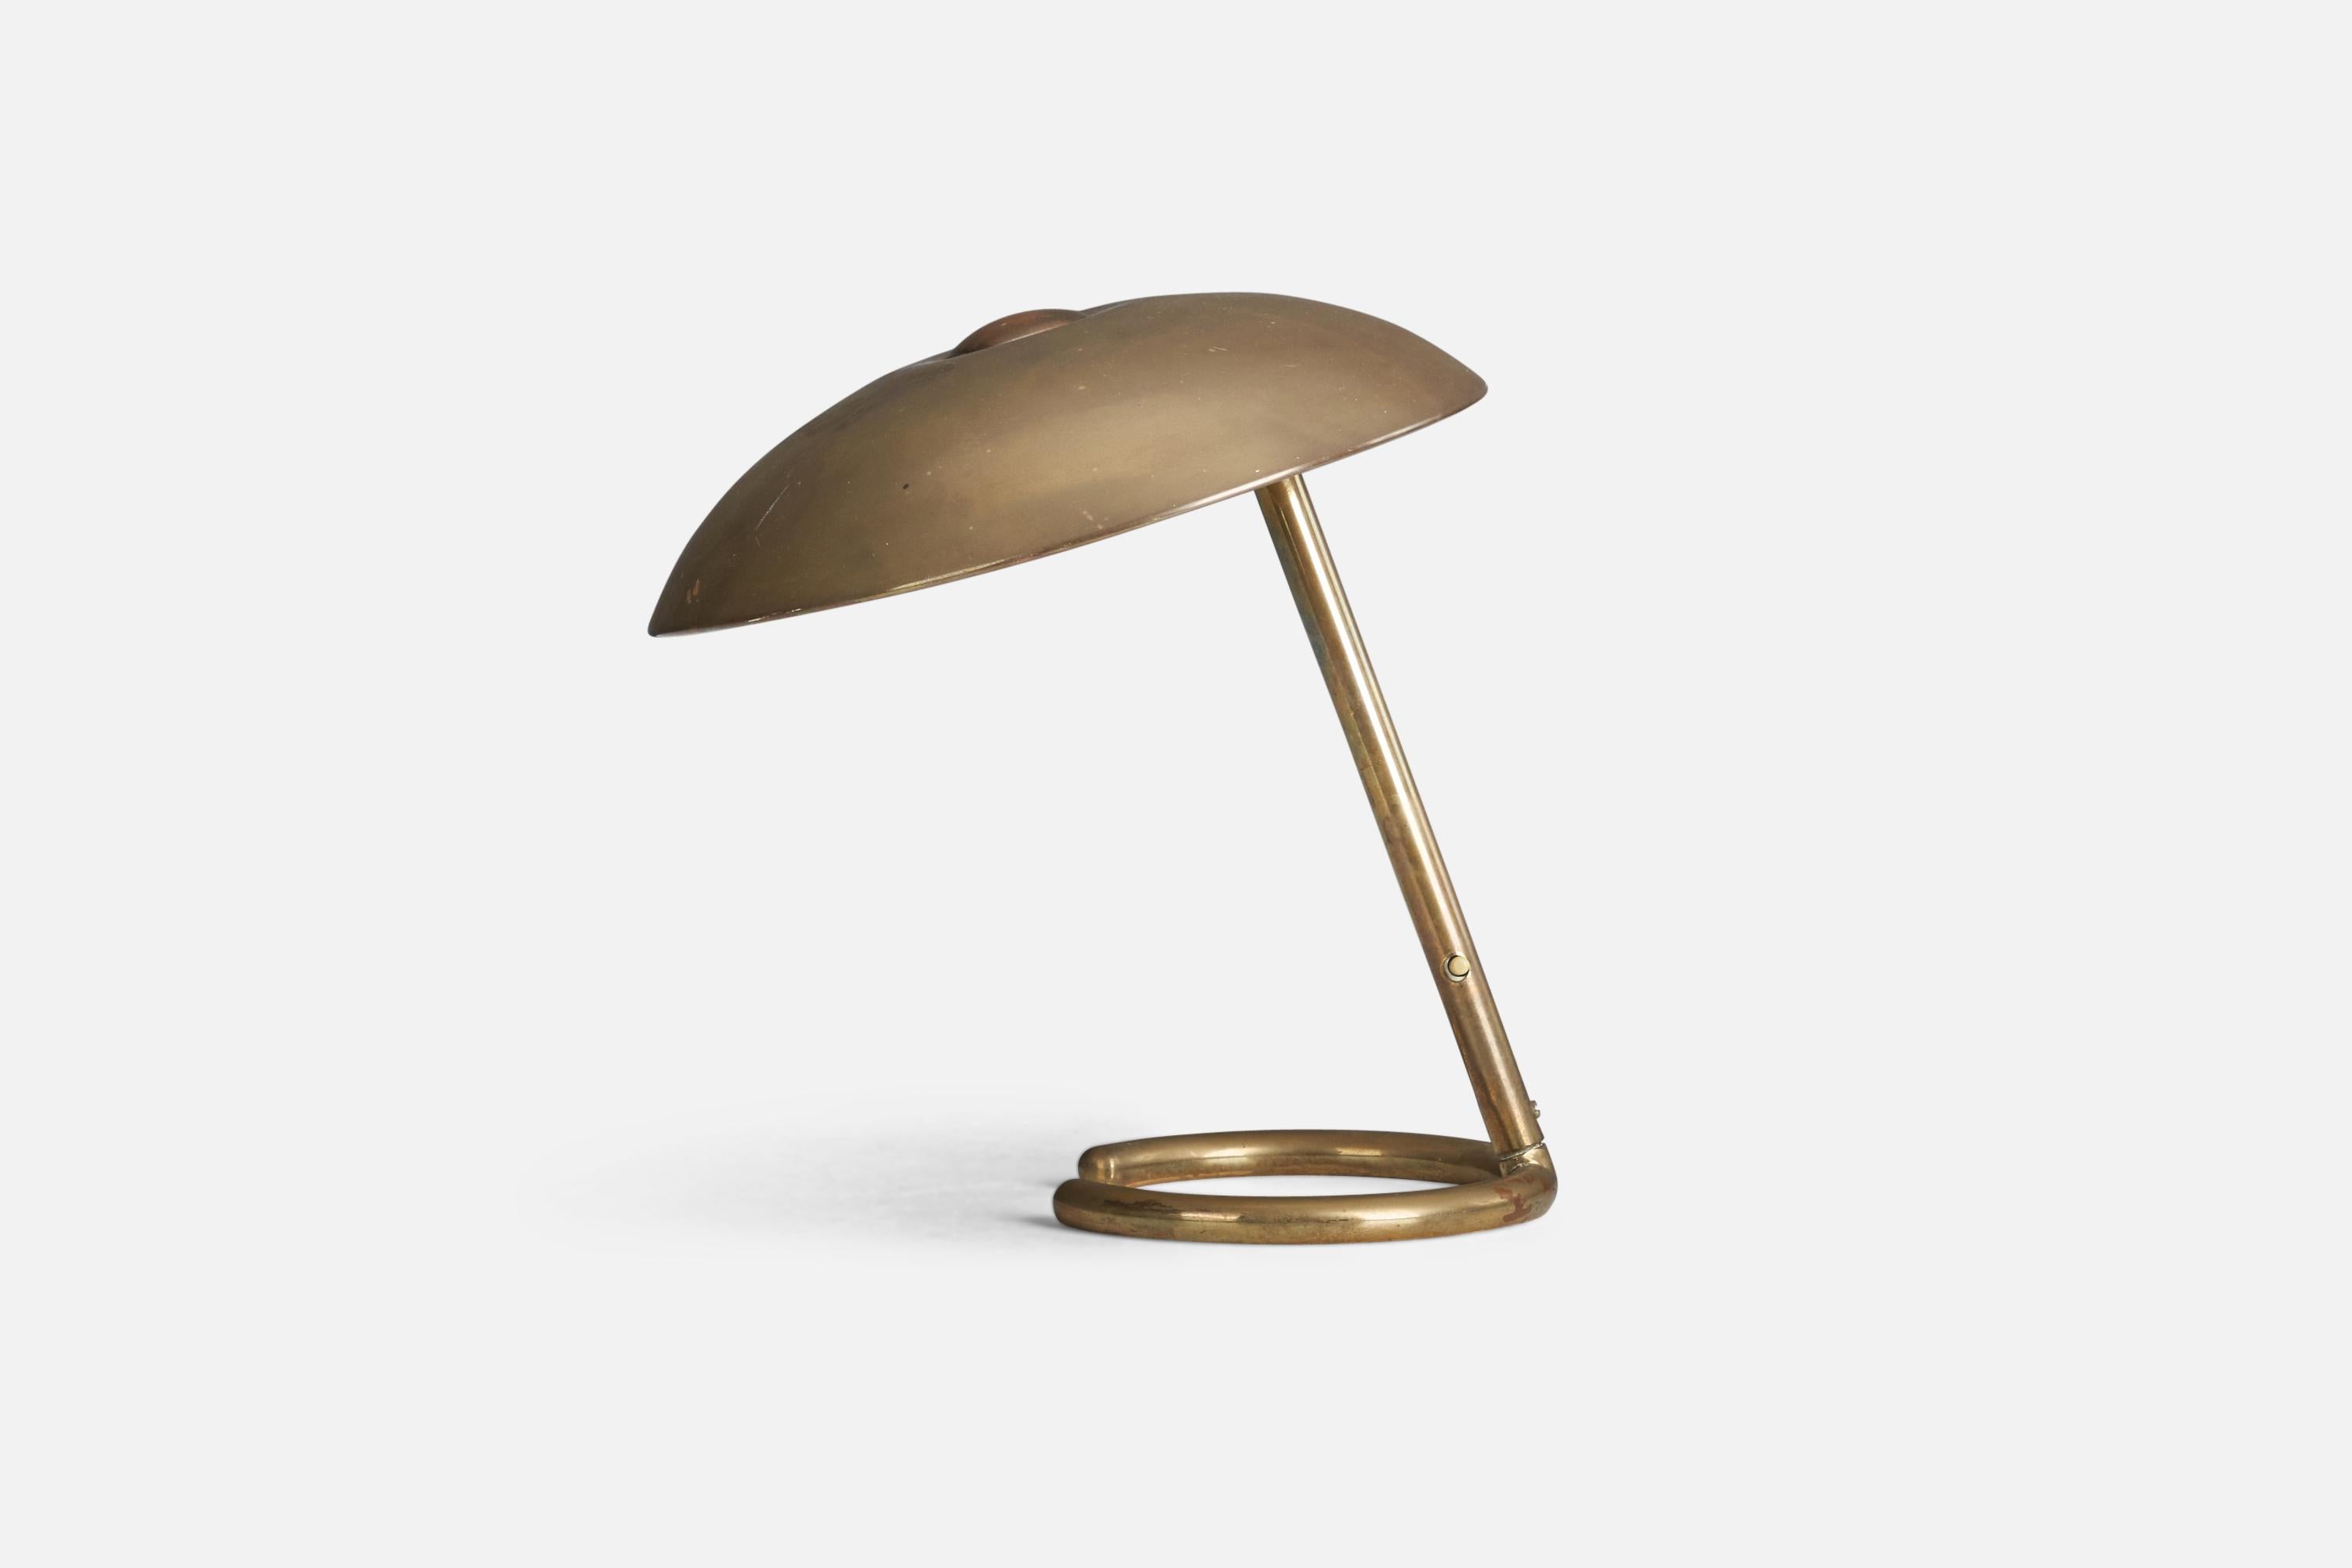 A brass table lamp designed and produced by an Italian Designer, Italy, 1940s.

Socket takes E-14 bulb.

There is no maximum wattage stated on the fixture.